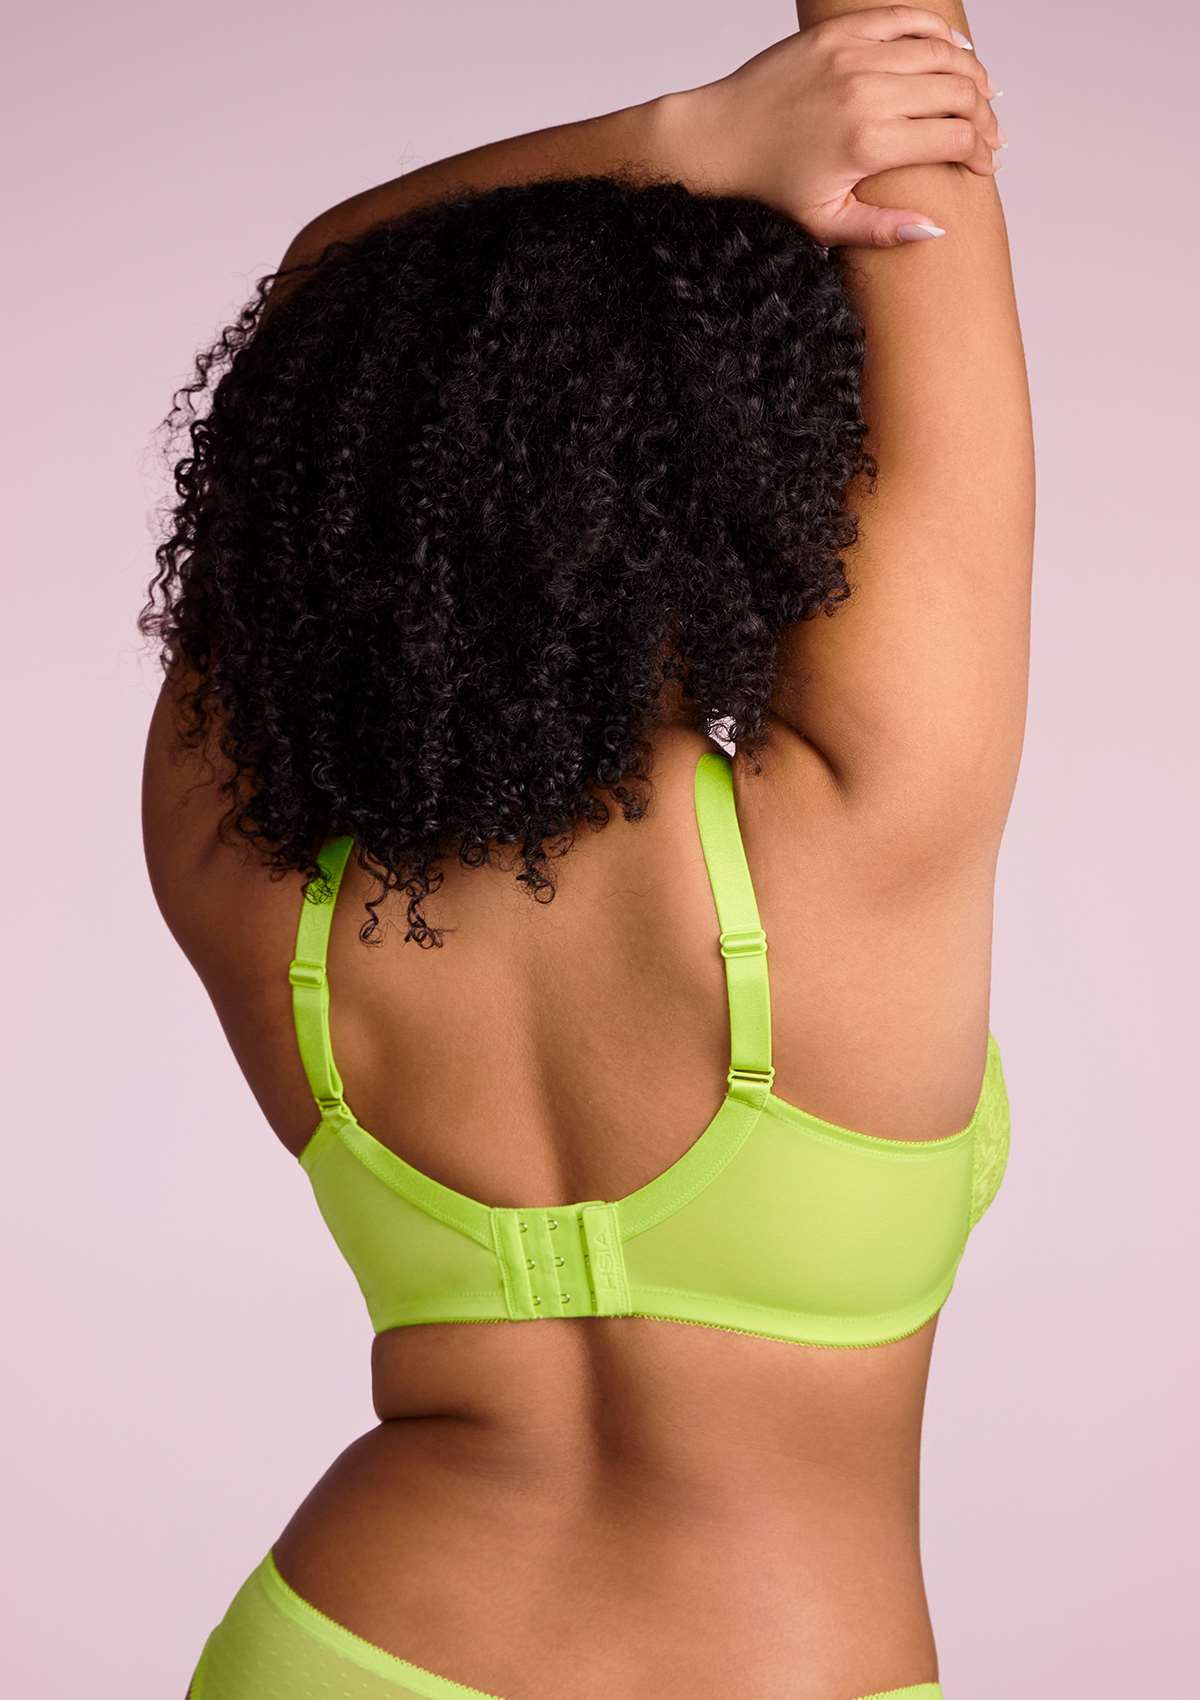 HSIA Enchante Full Cup Minimizing Bra: Supportive Unlined Lace Bra - Lime Green / 40 / DDD/F